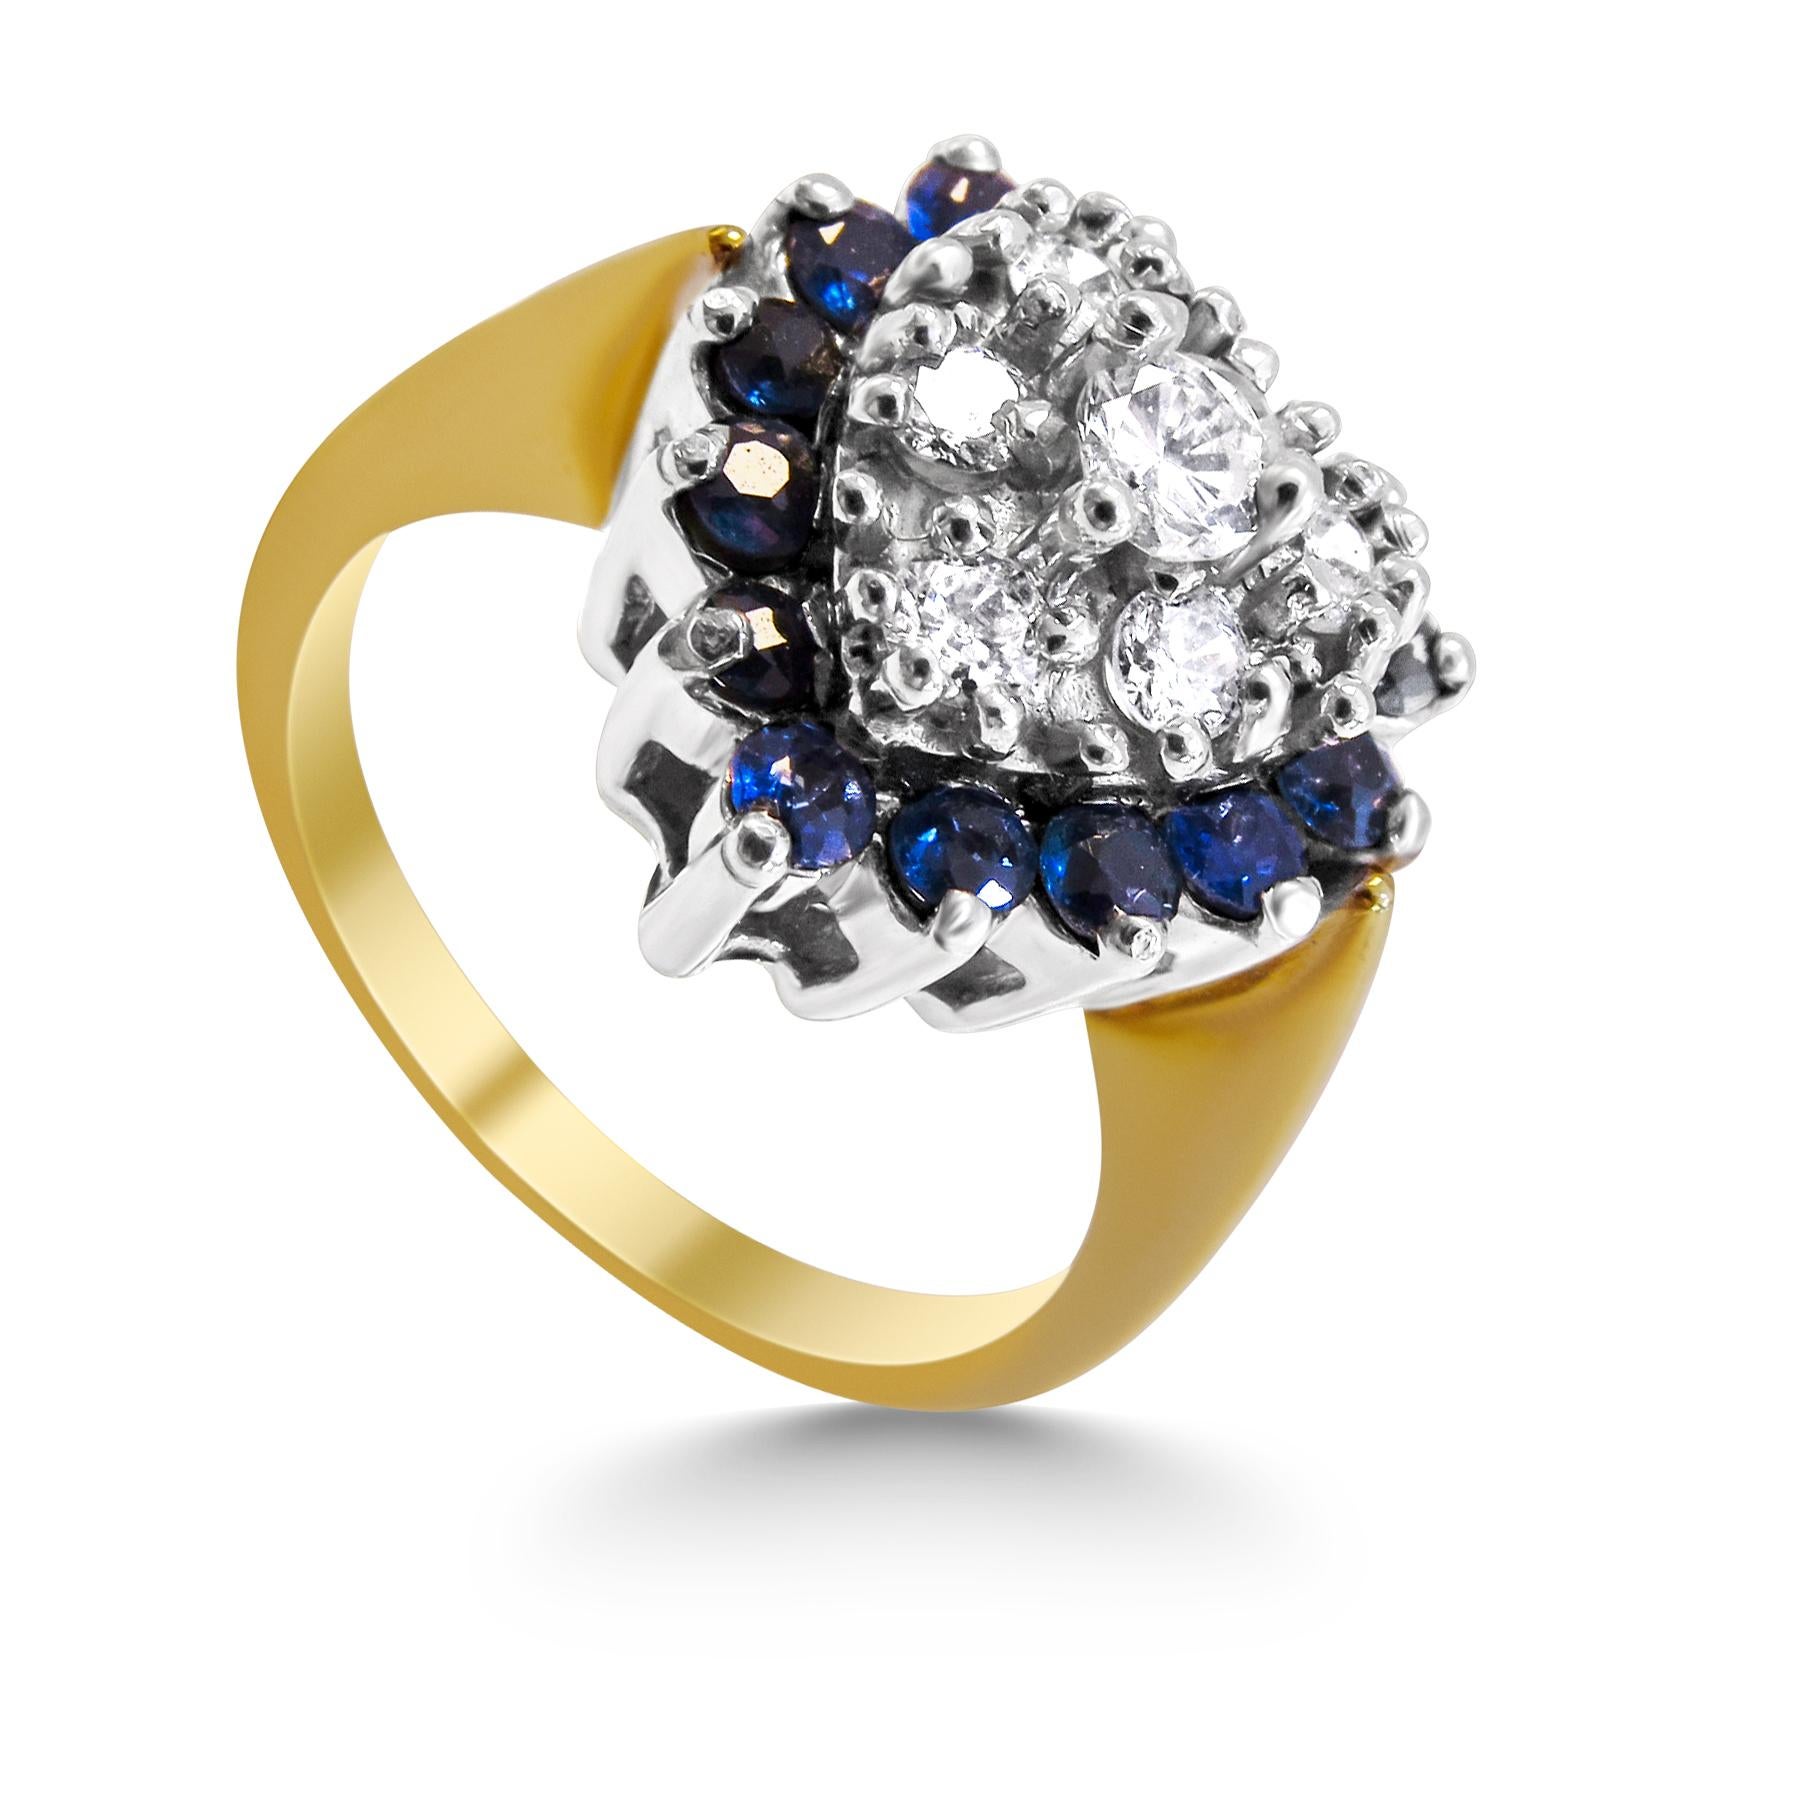 14k Yellow  and white gold
Weight= 5.2gr 
Size= 5 3/4  (We offer complementary resizing upon request ) 
Diamond= 0.40 ct total 
Sapphire= 0.30 ct  total